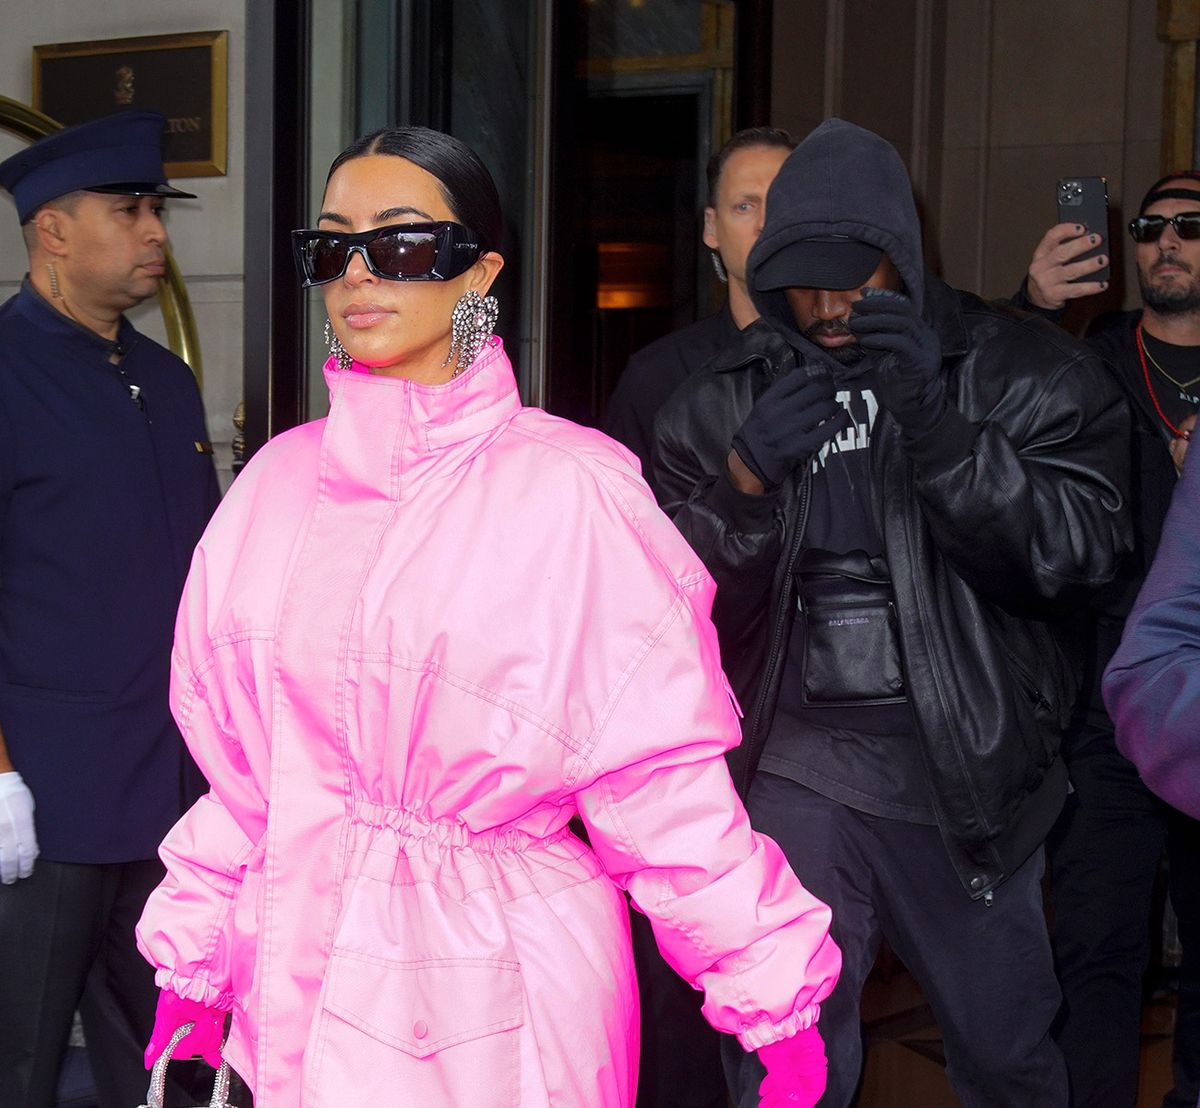 Celebrity Sightings In New York City - October 09, 2021
NEW YORK, NEW YORK - OCTOBER 09: Kanye West and Kim Kardashian head out of their hotel on October 09, 2021 in New York City. (Photo by Gotham/GC Images)